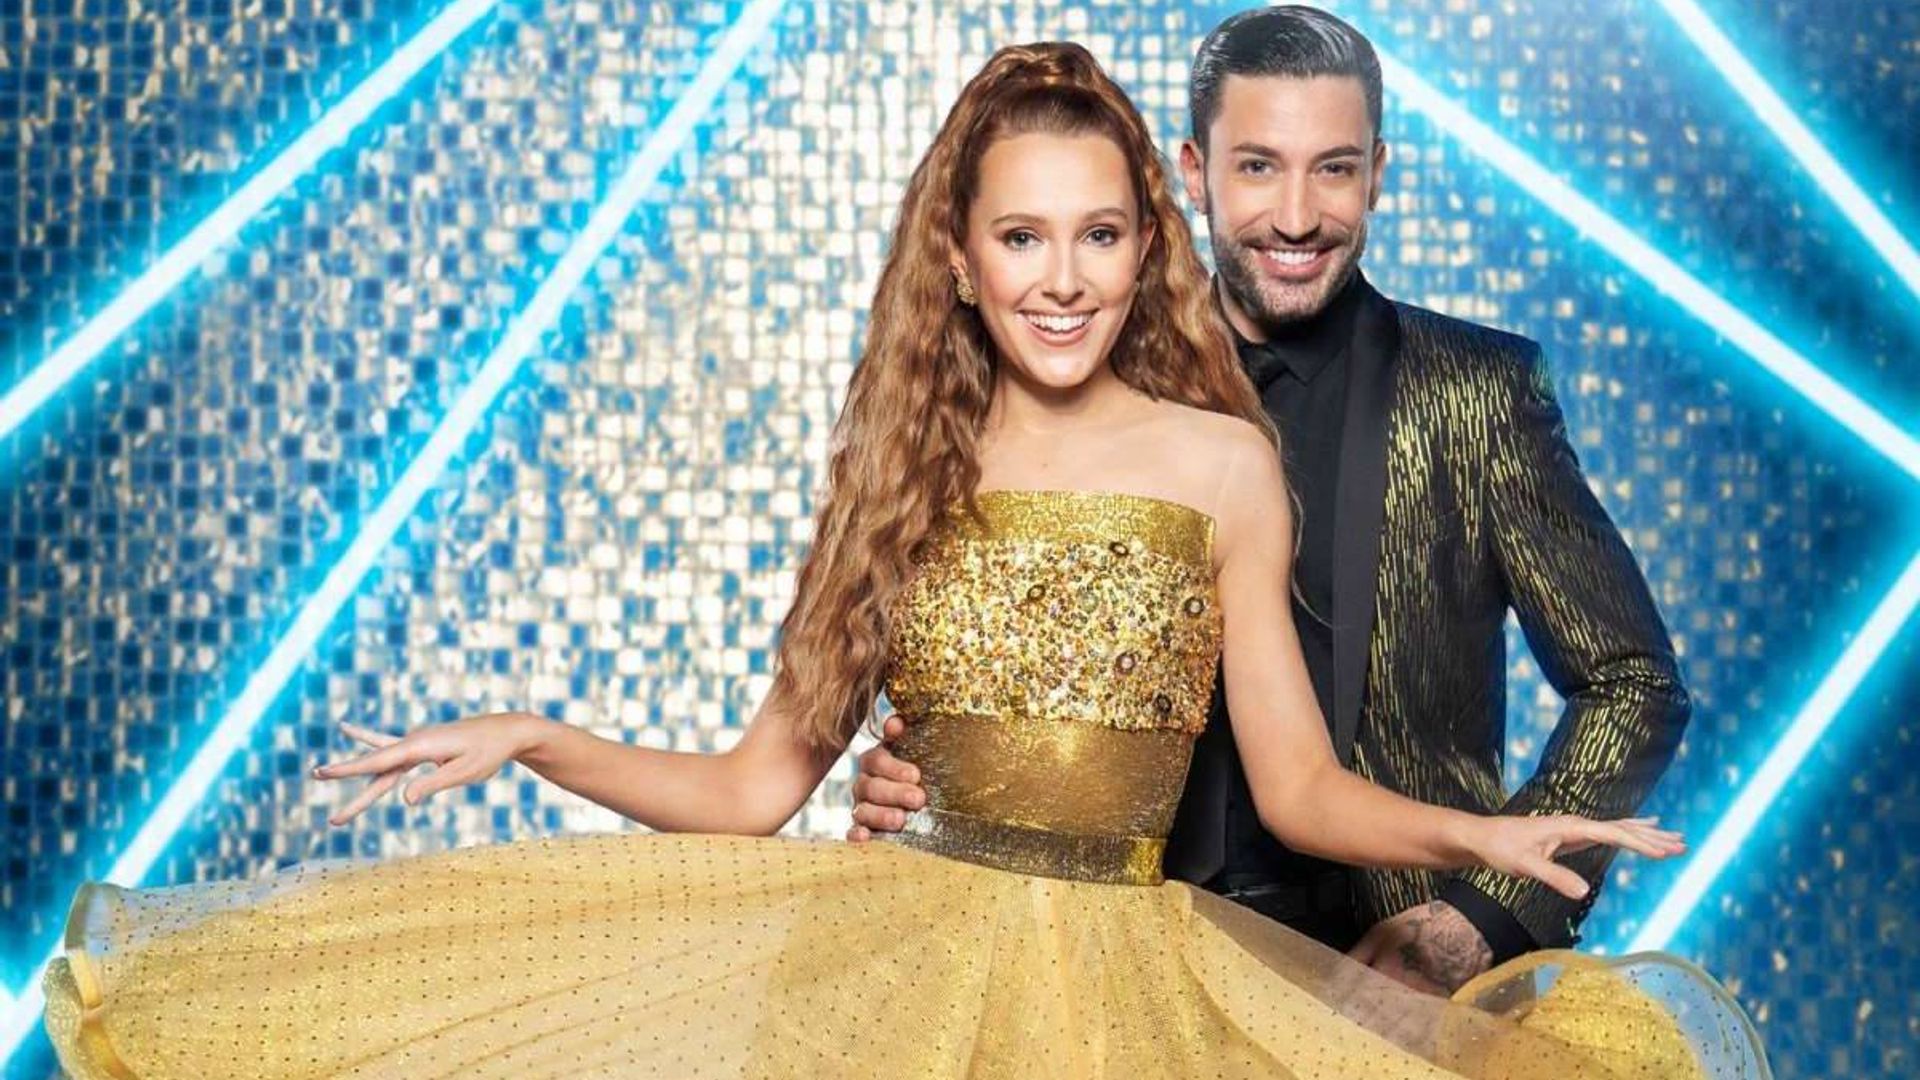 Giovanni Pernice and Rose Ayling-Ellis flooded with support as they celebrate incredible achievement